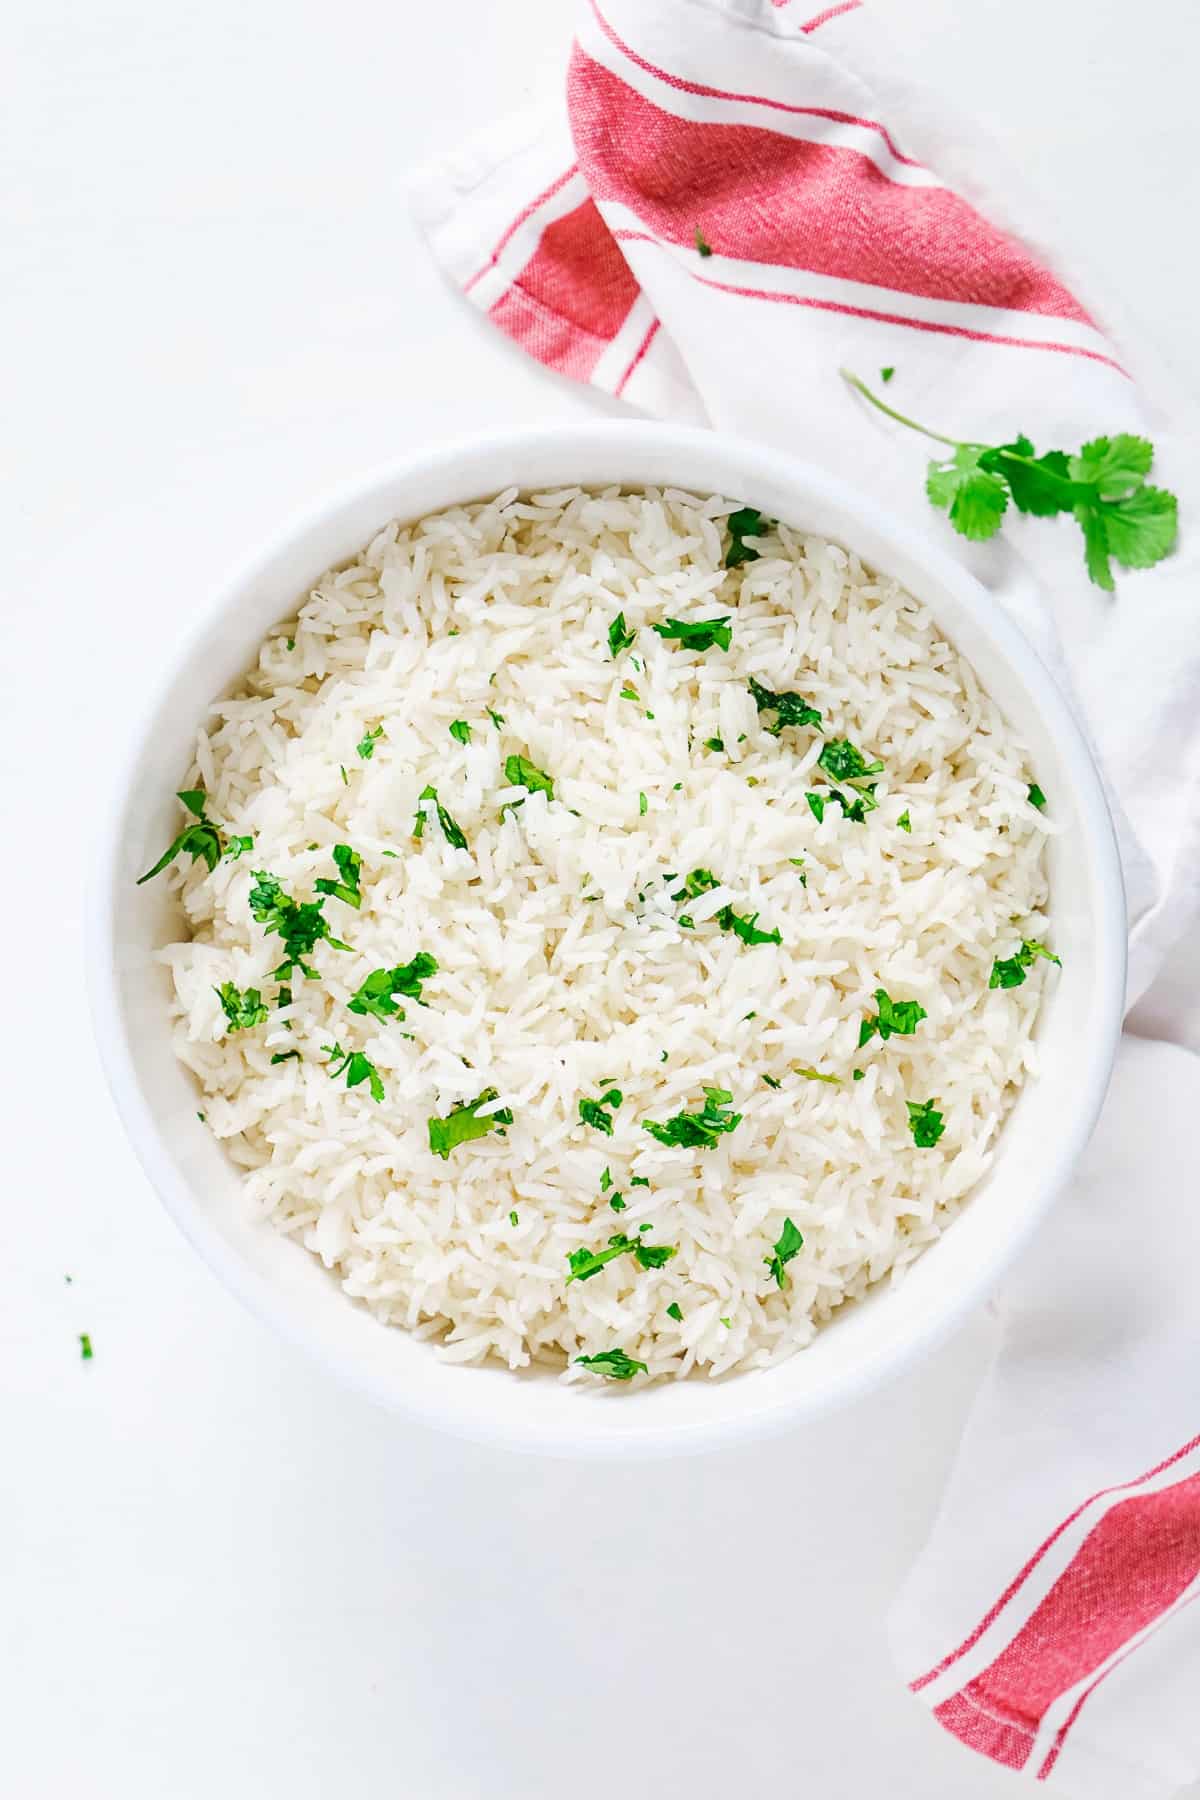 Top view of a bowl of basmati rice with parsley